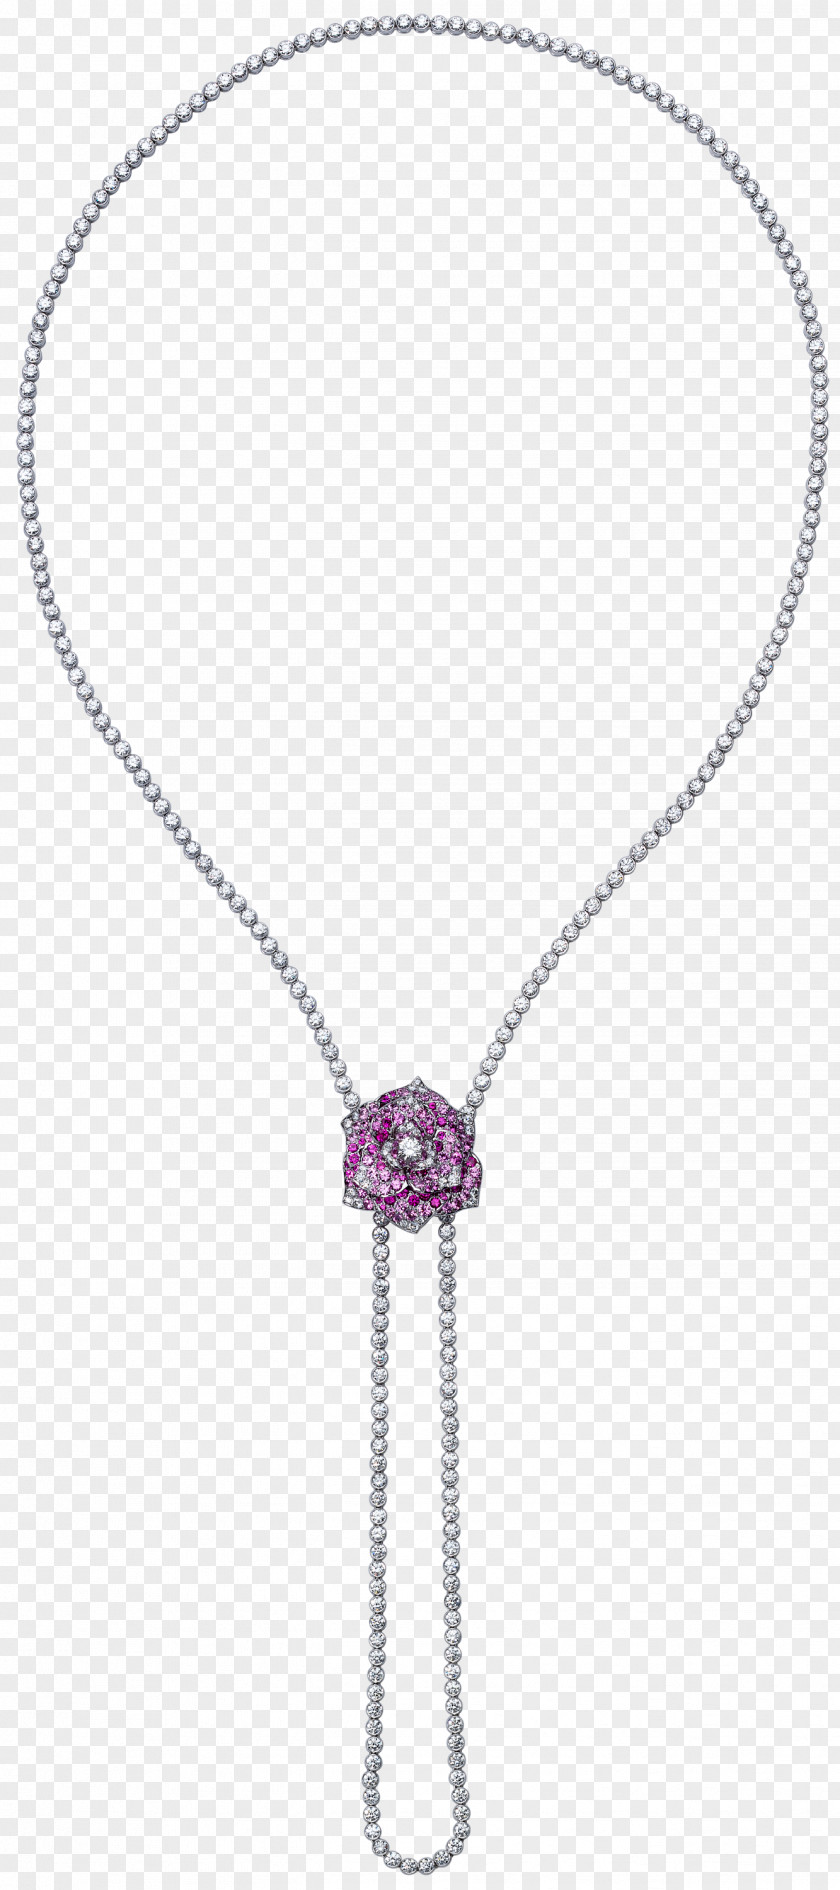 Necklace Pendant Chain Jewellery Purple PNG